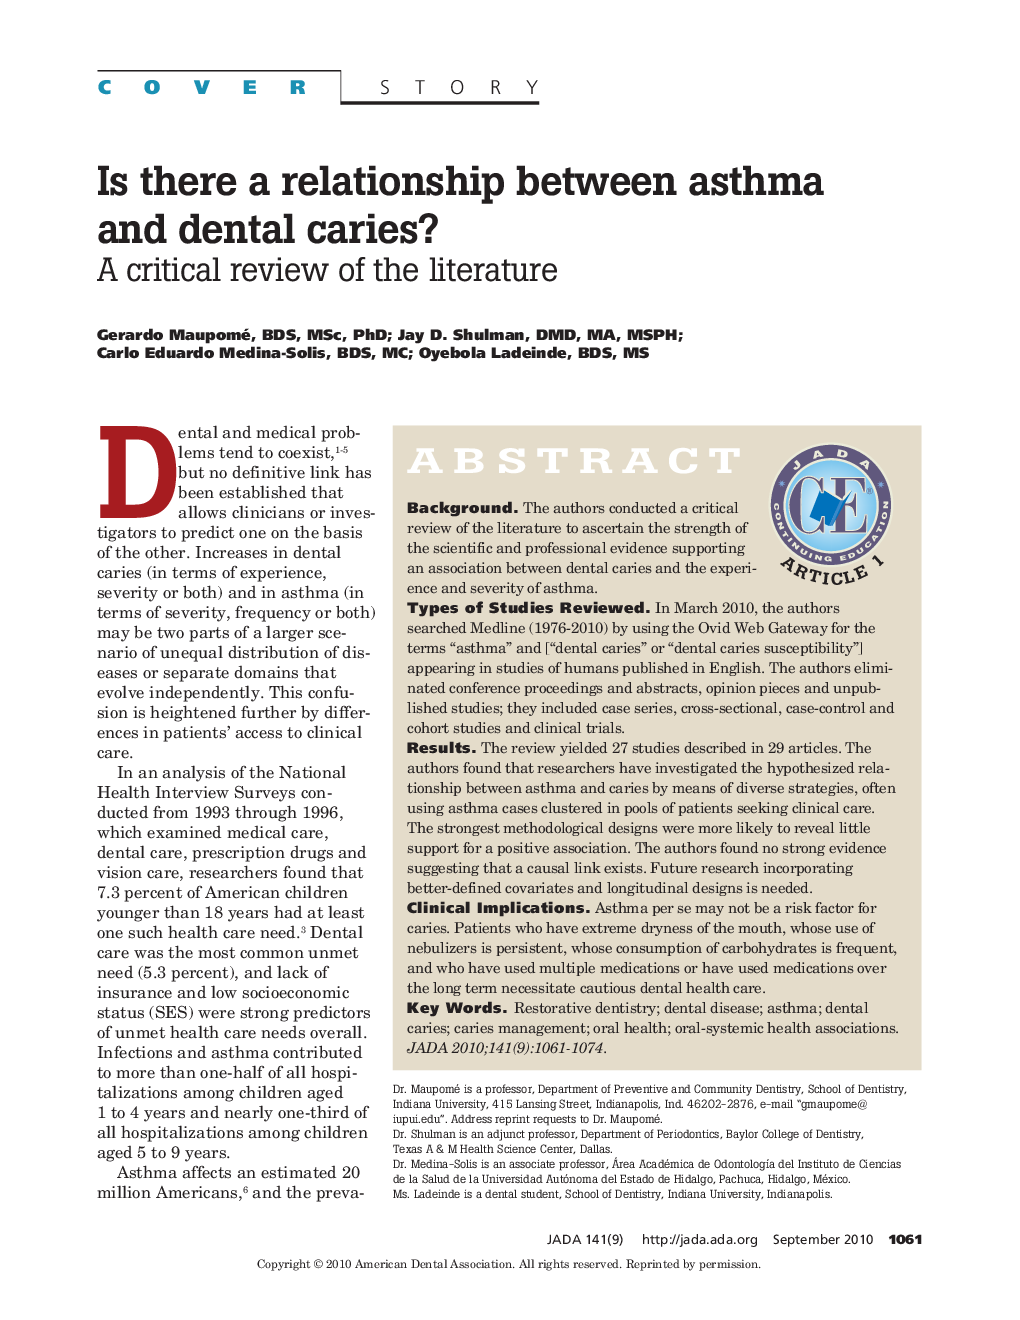 Is There a Relationship Between Asthma and Dental Caries? 